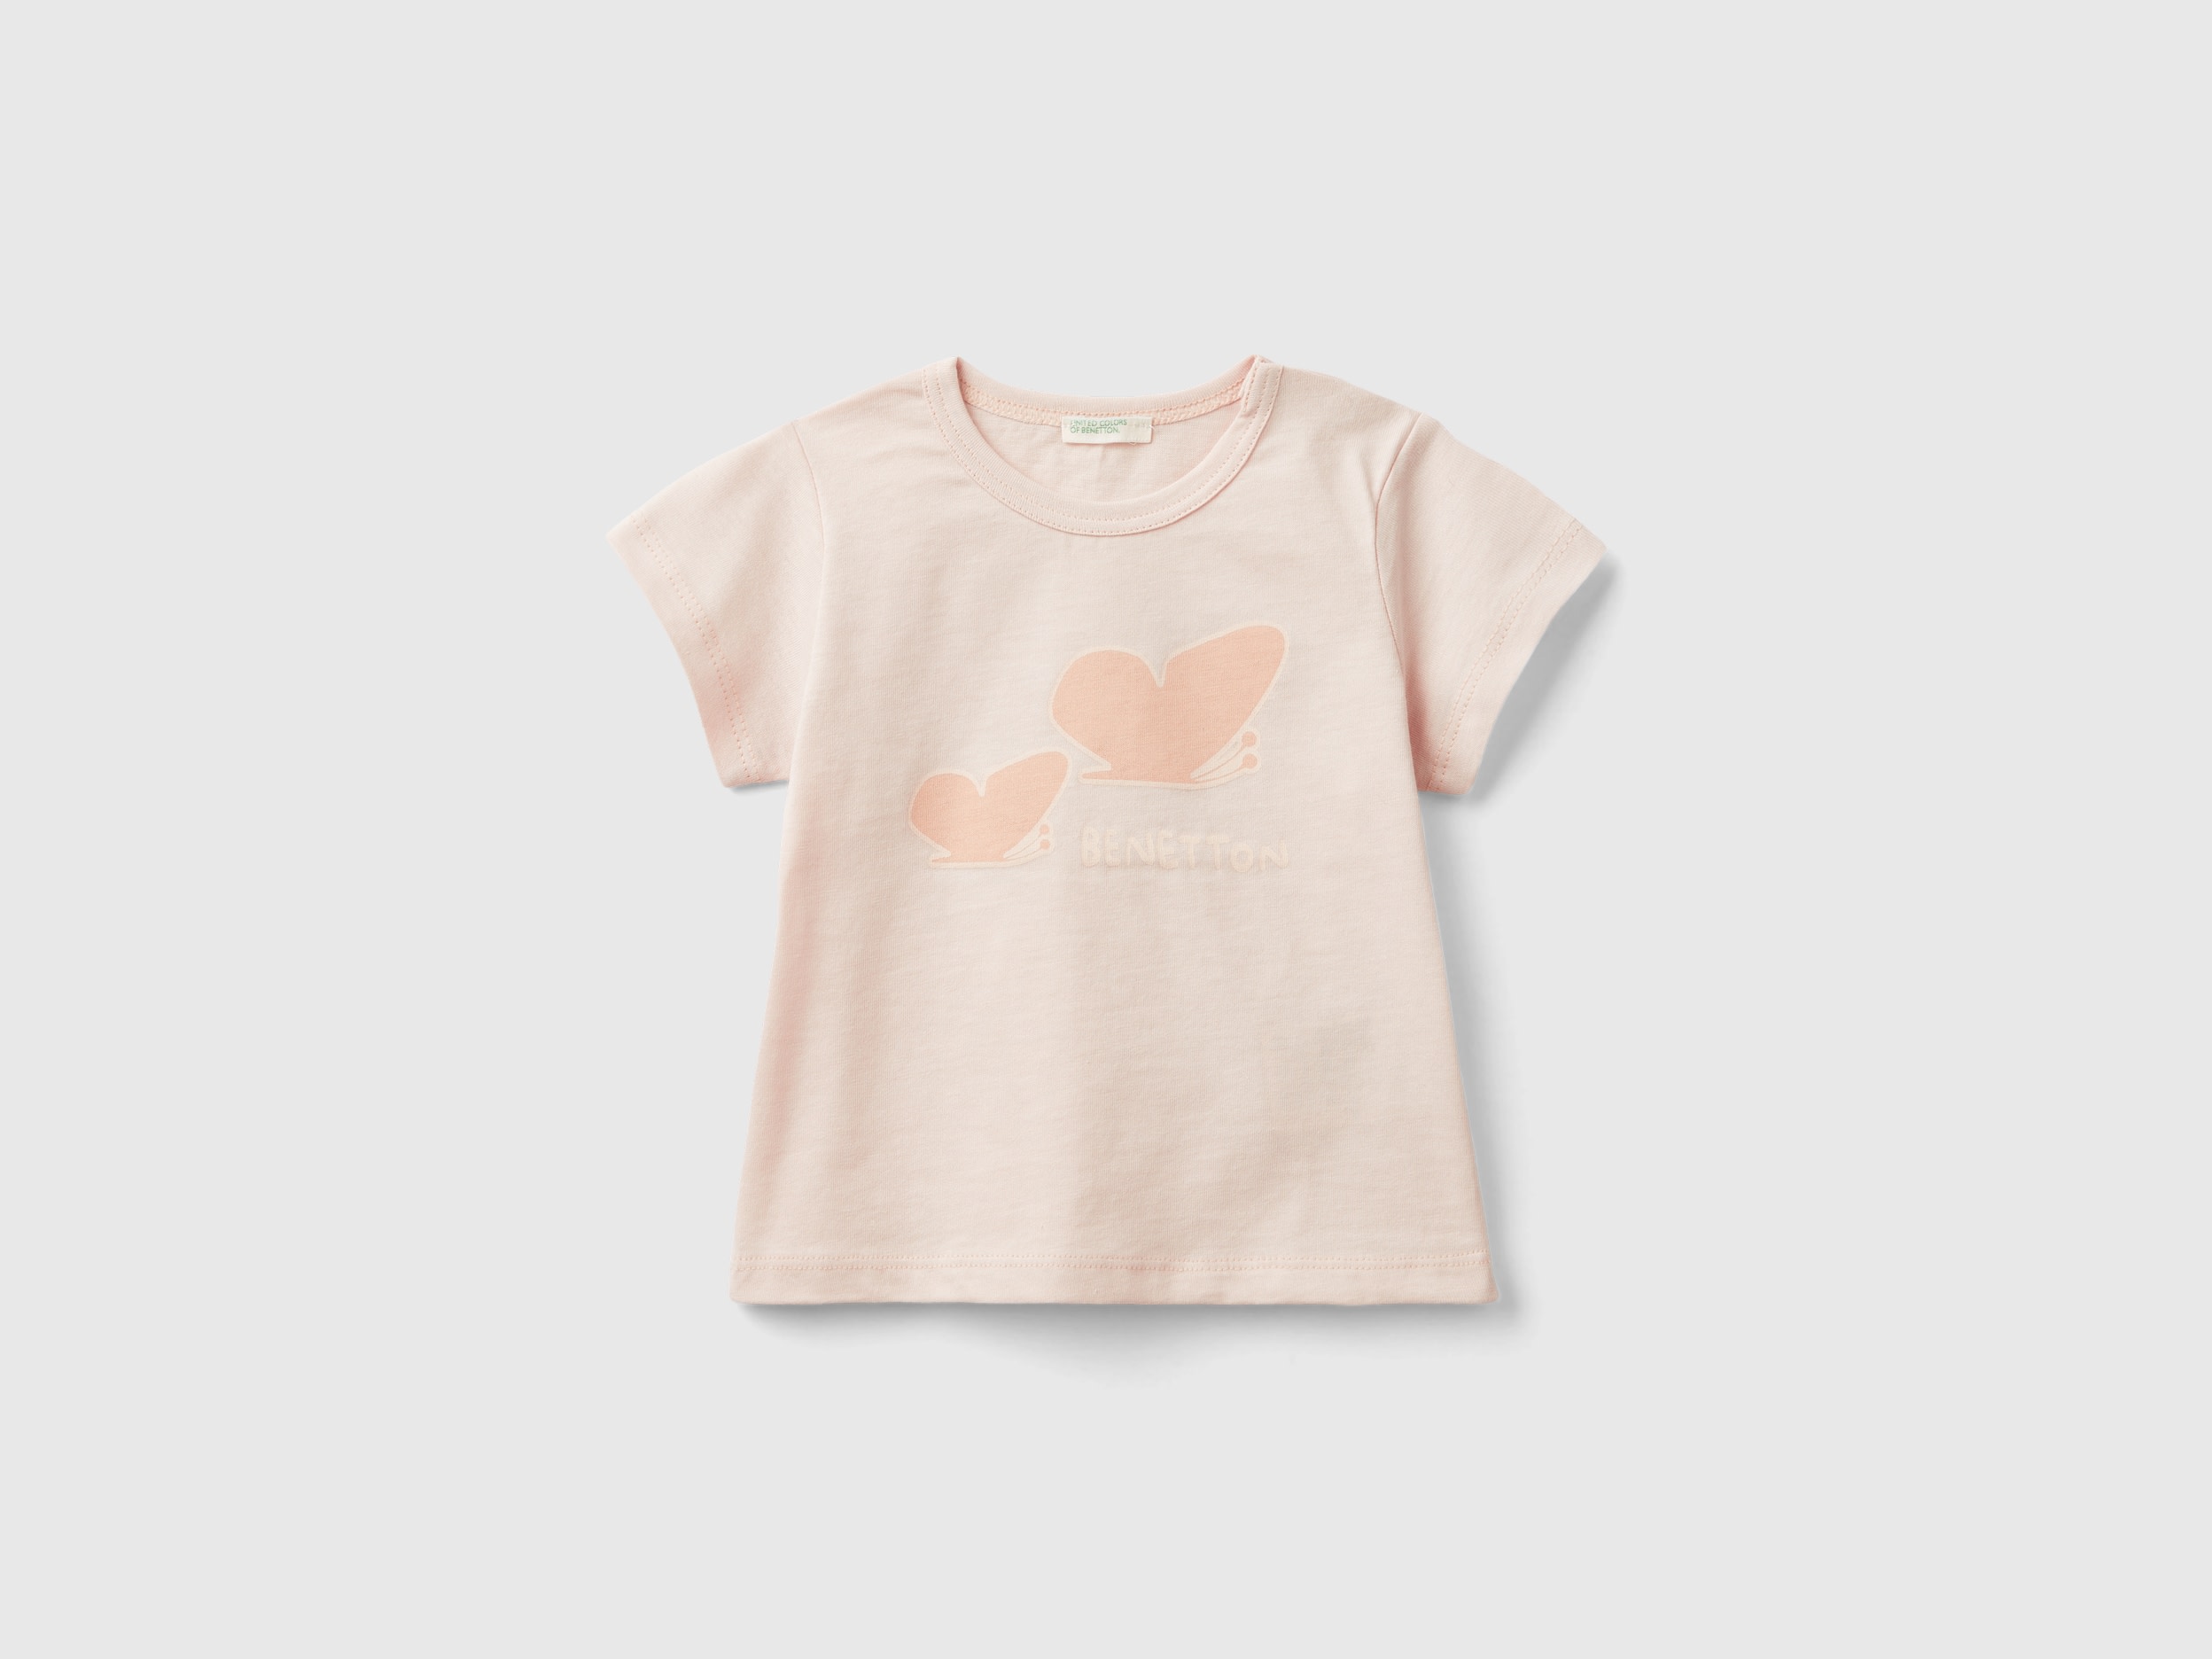 Image of Benetton, Organic Cotton T-shirt With Print, size 68, Peach, Kids